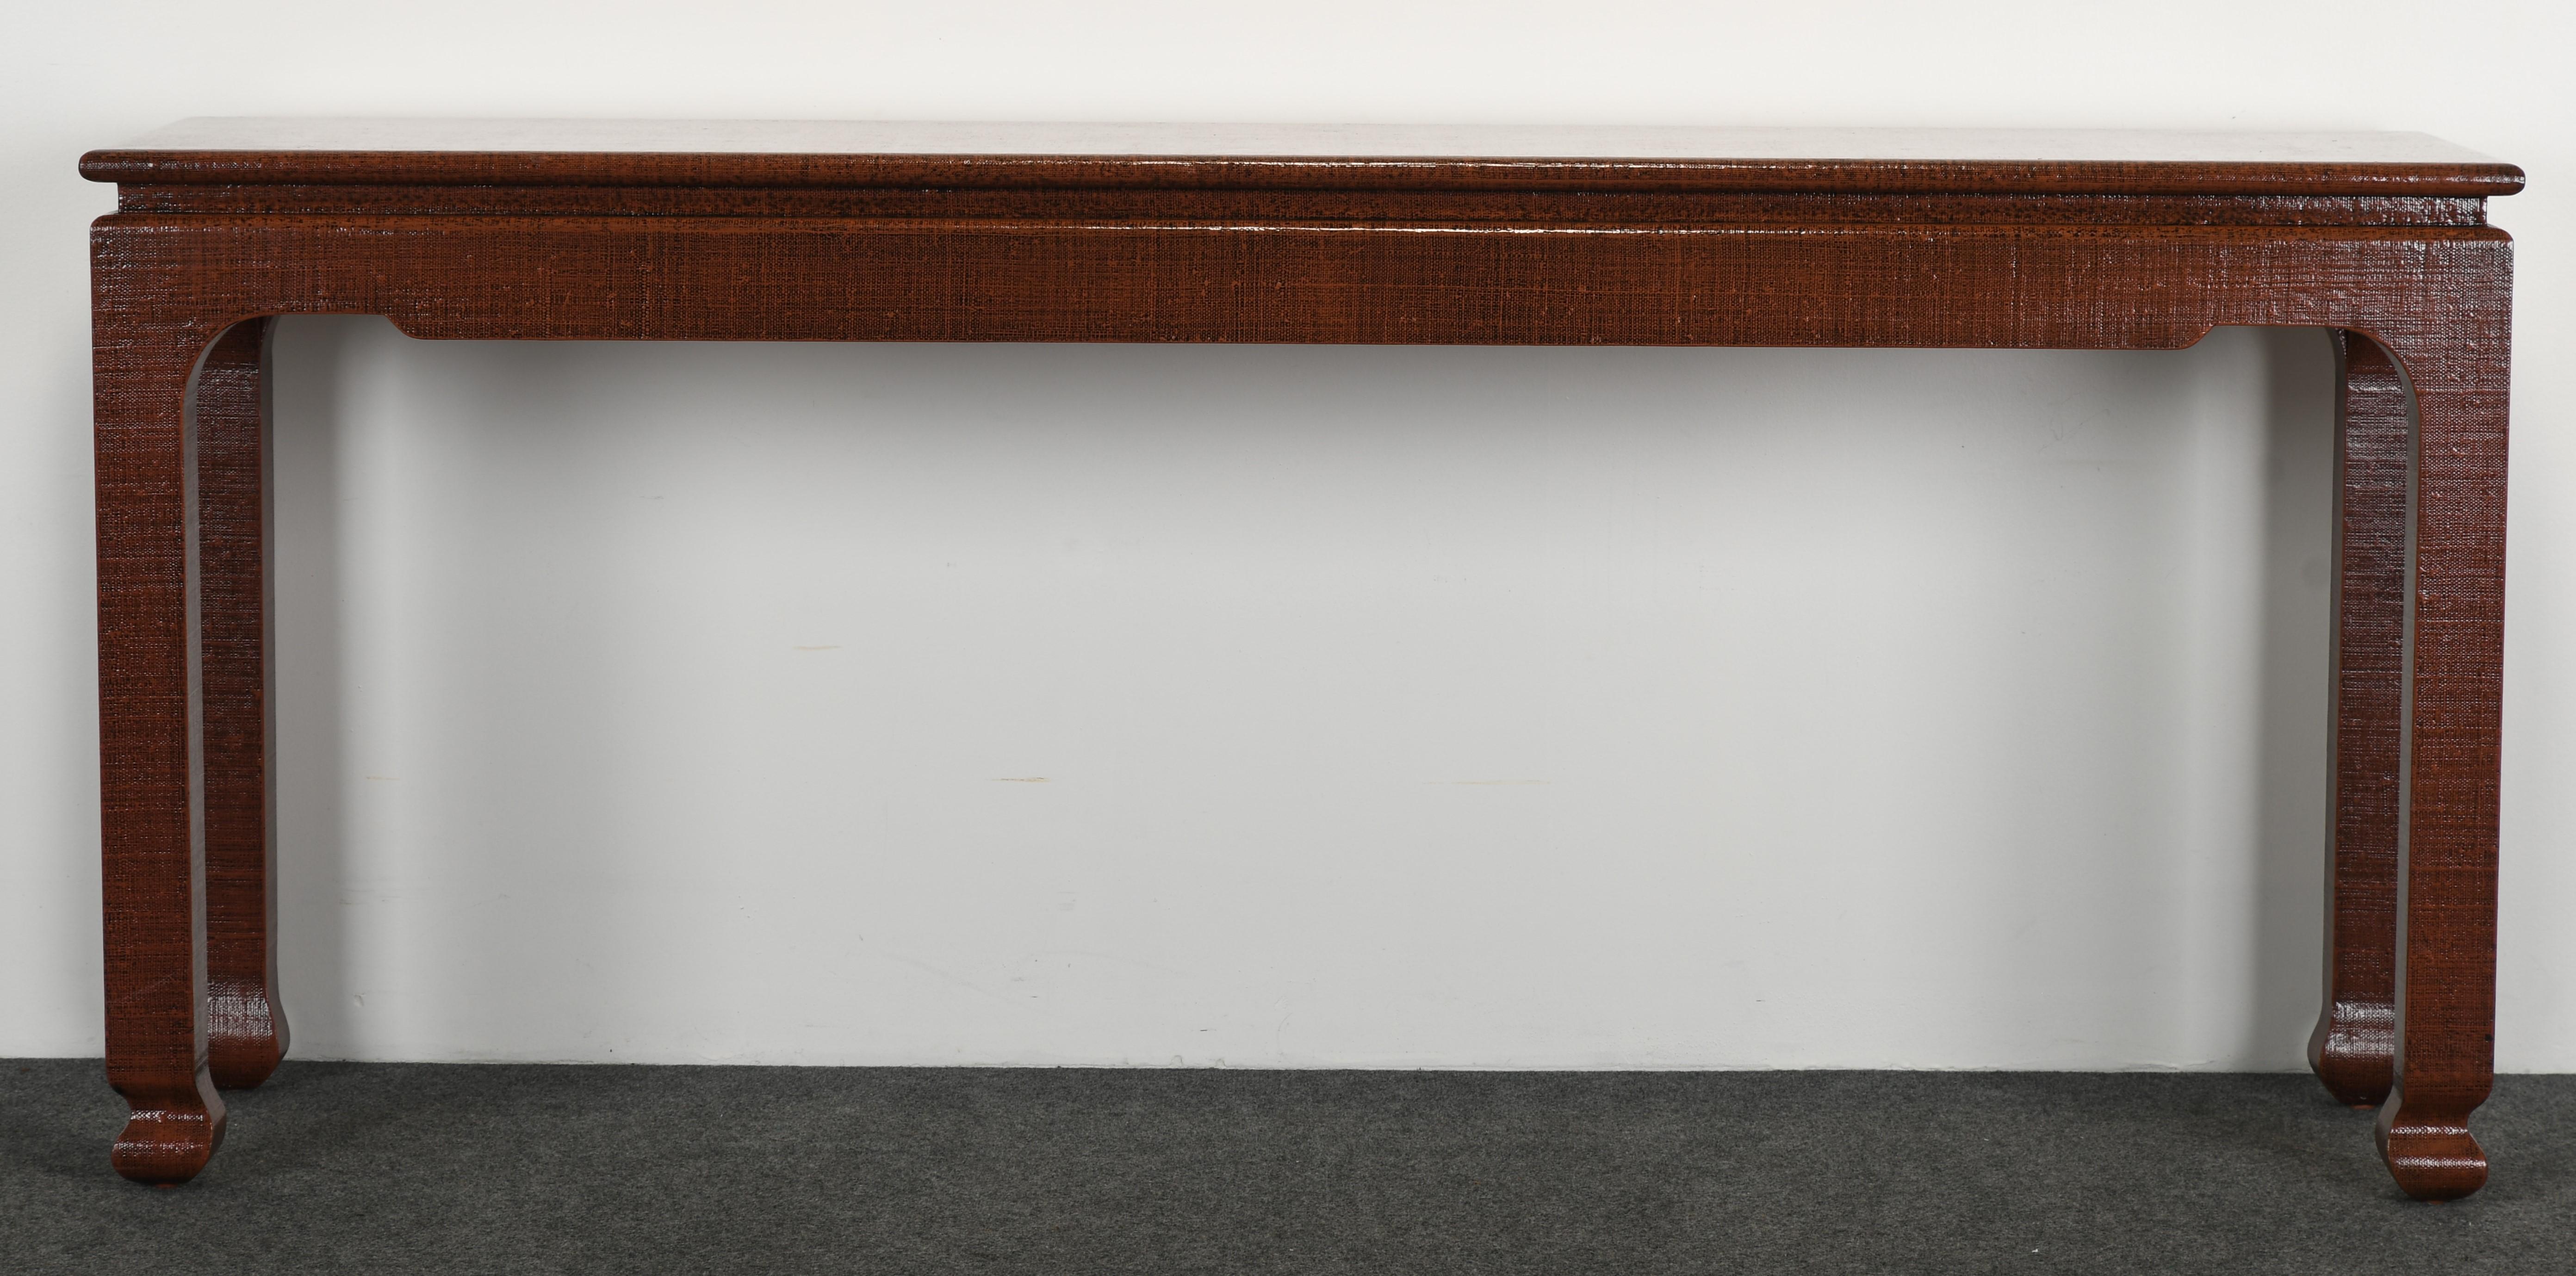 A handsome organic modern lacquered raffia console table by Harrison Van Horn, 1980s. A sleek architectural Asian-modern table from the designers' Flint Harrison & Jay Van Horn who were highly influential in the post-modern era. This console or side